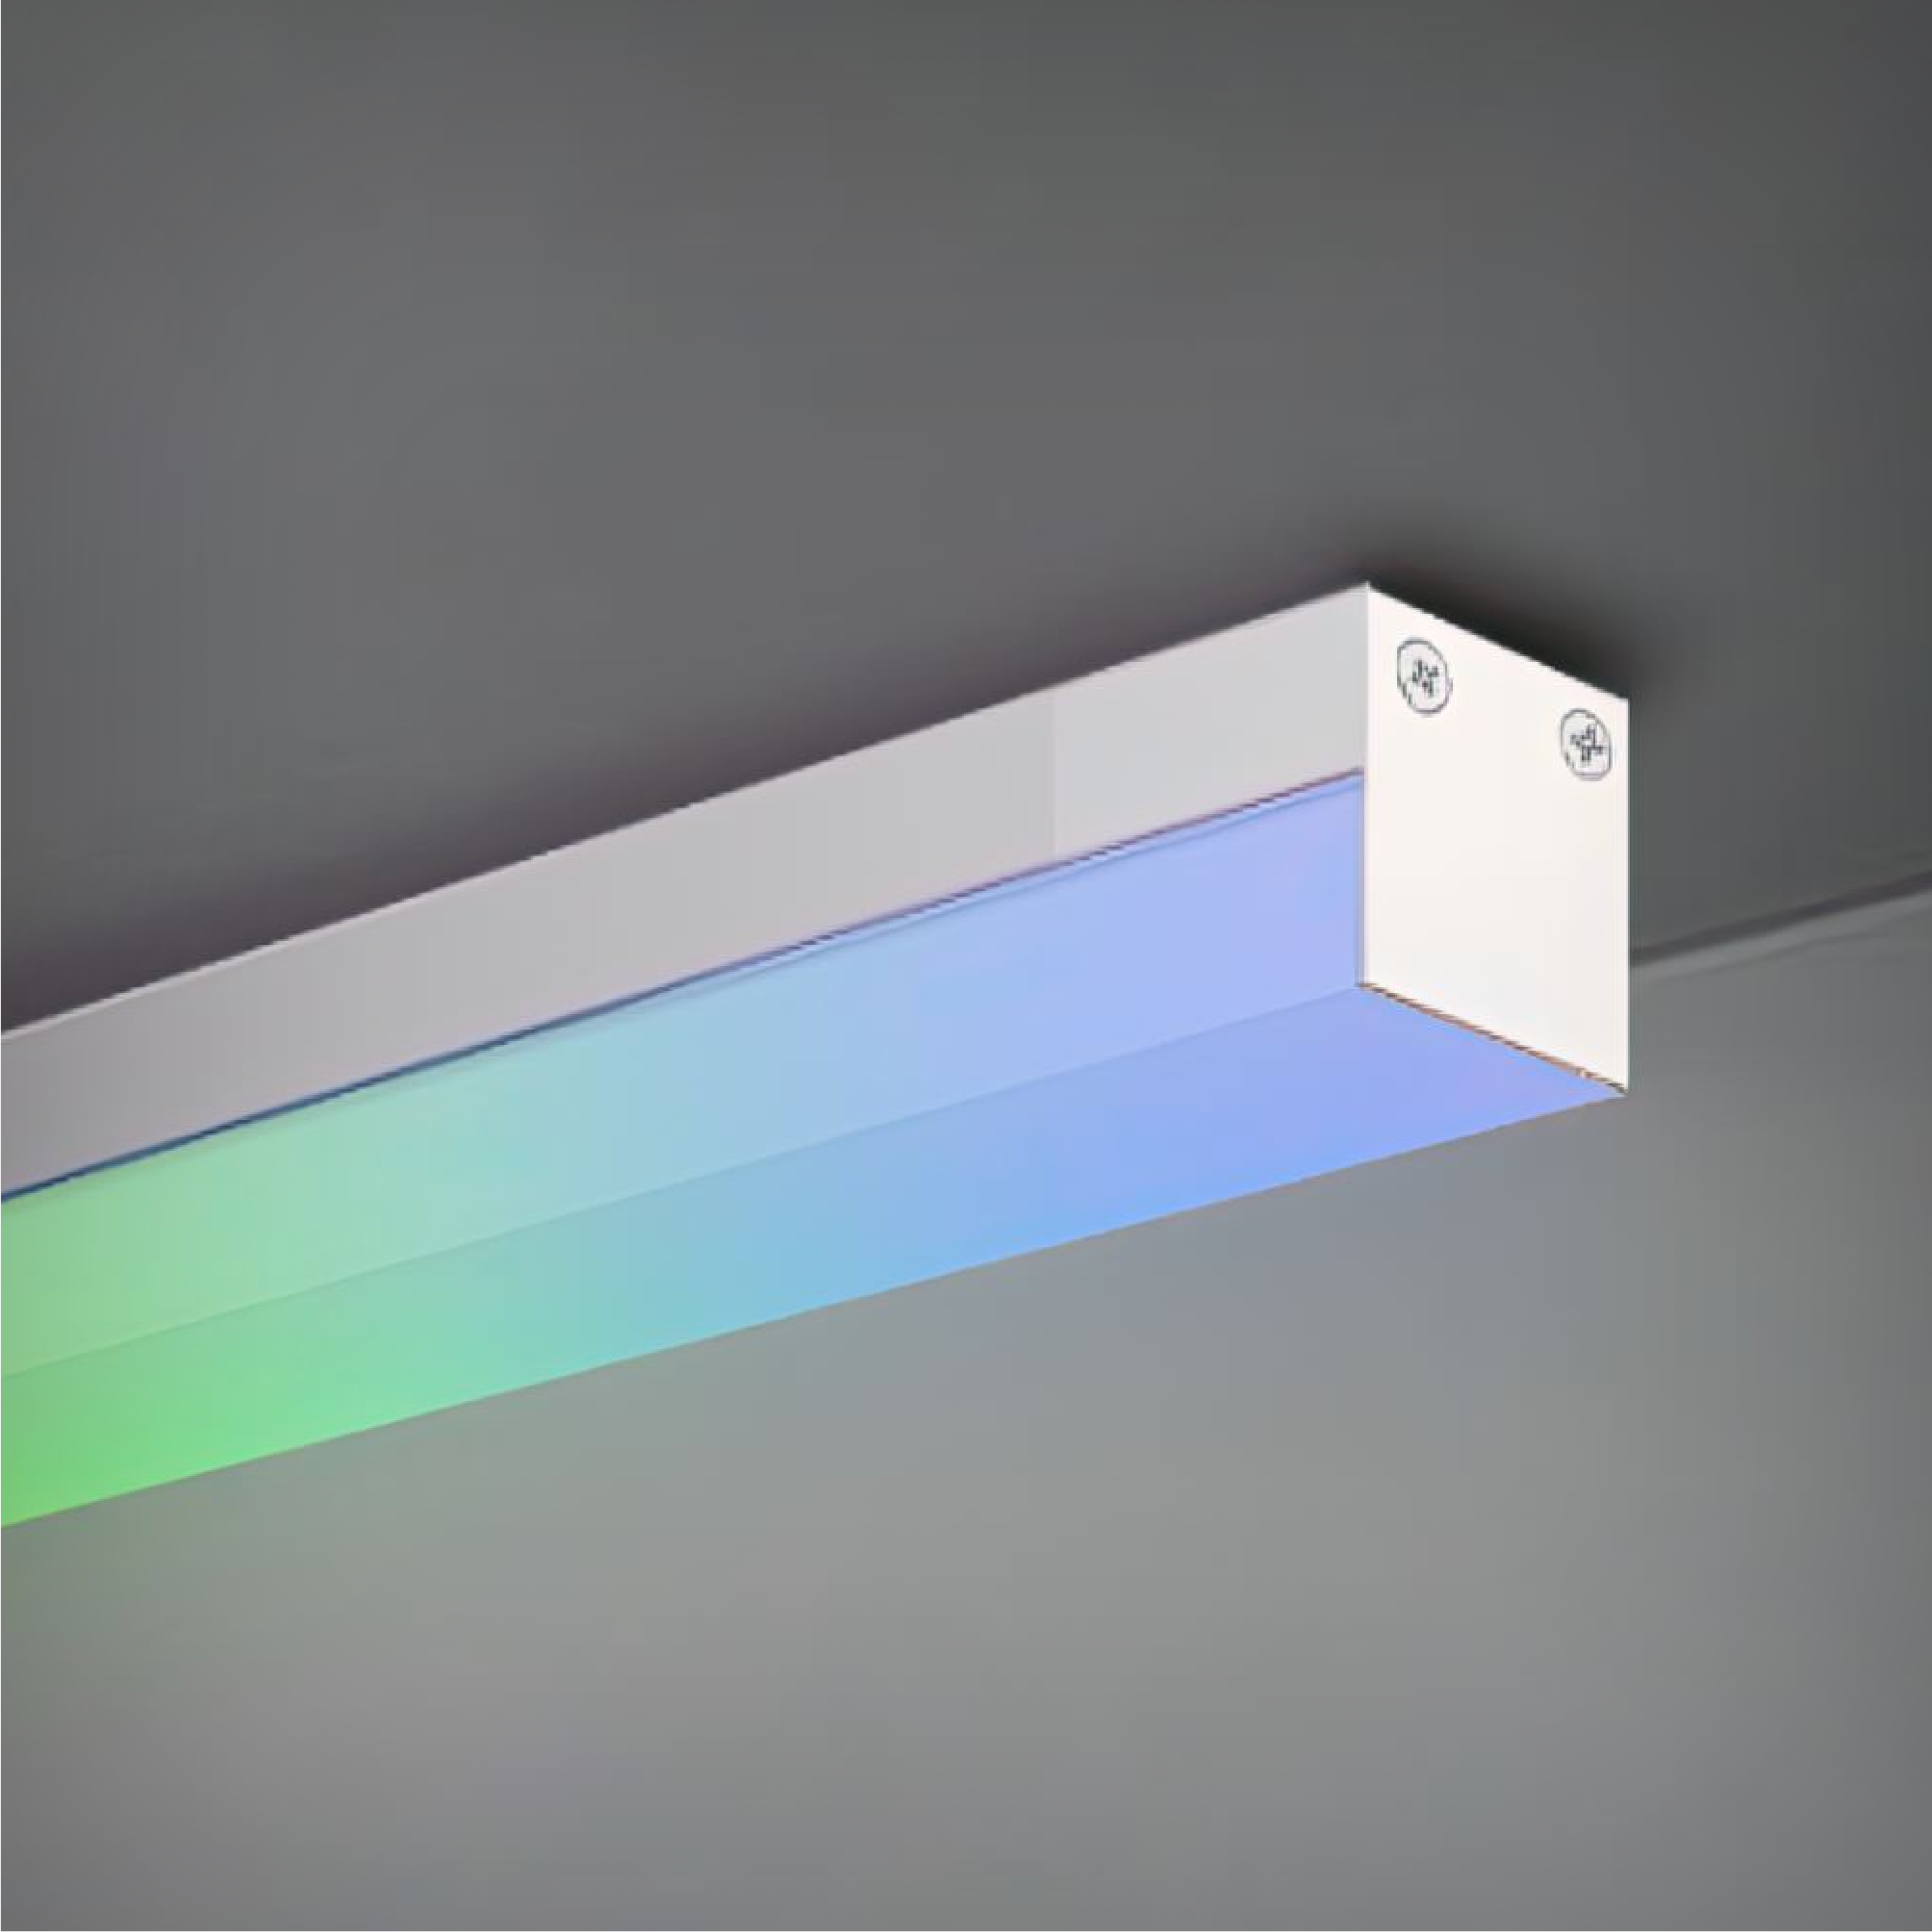 Slim RGBW Color-Changing LED Linear Ceiling Light with a 0.75-Inch profile